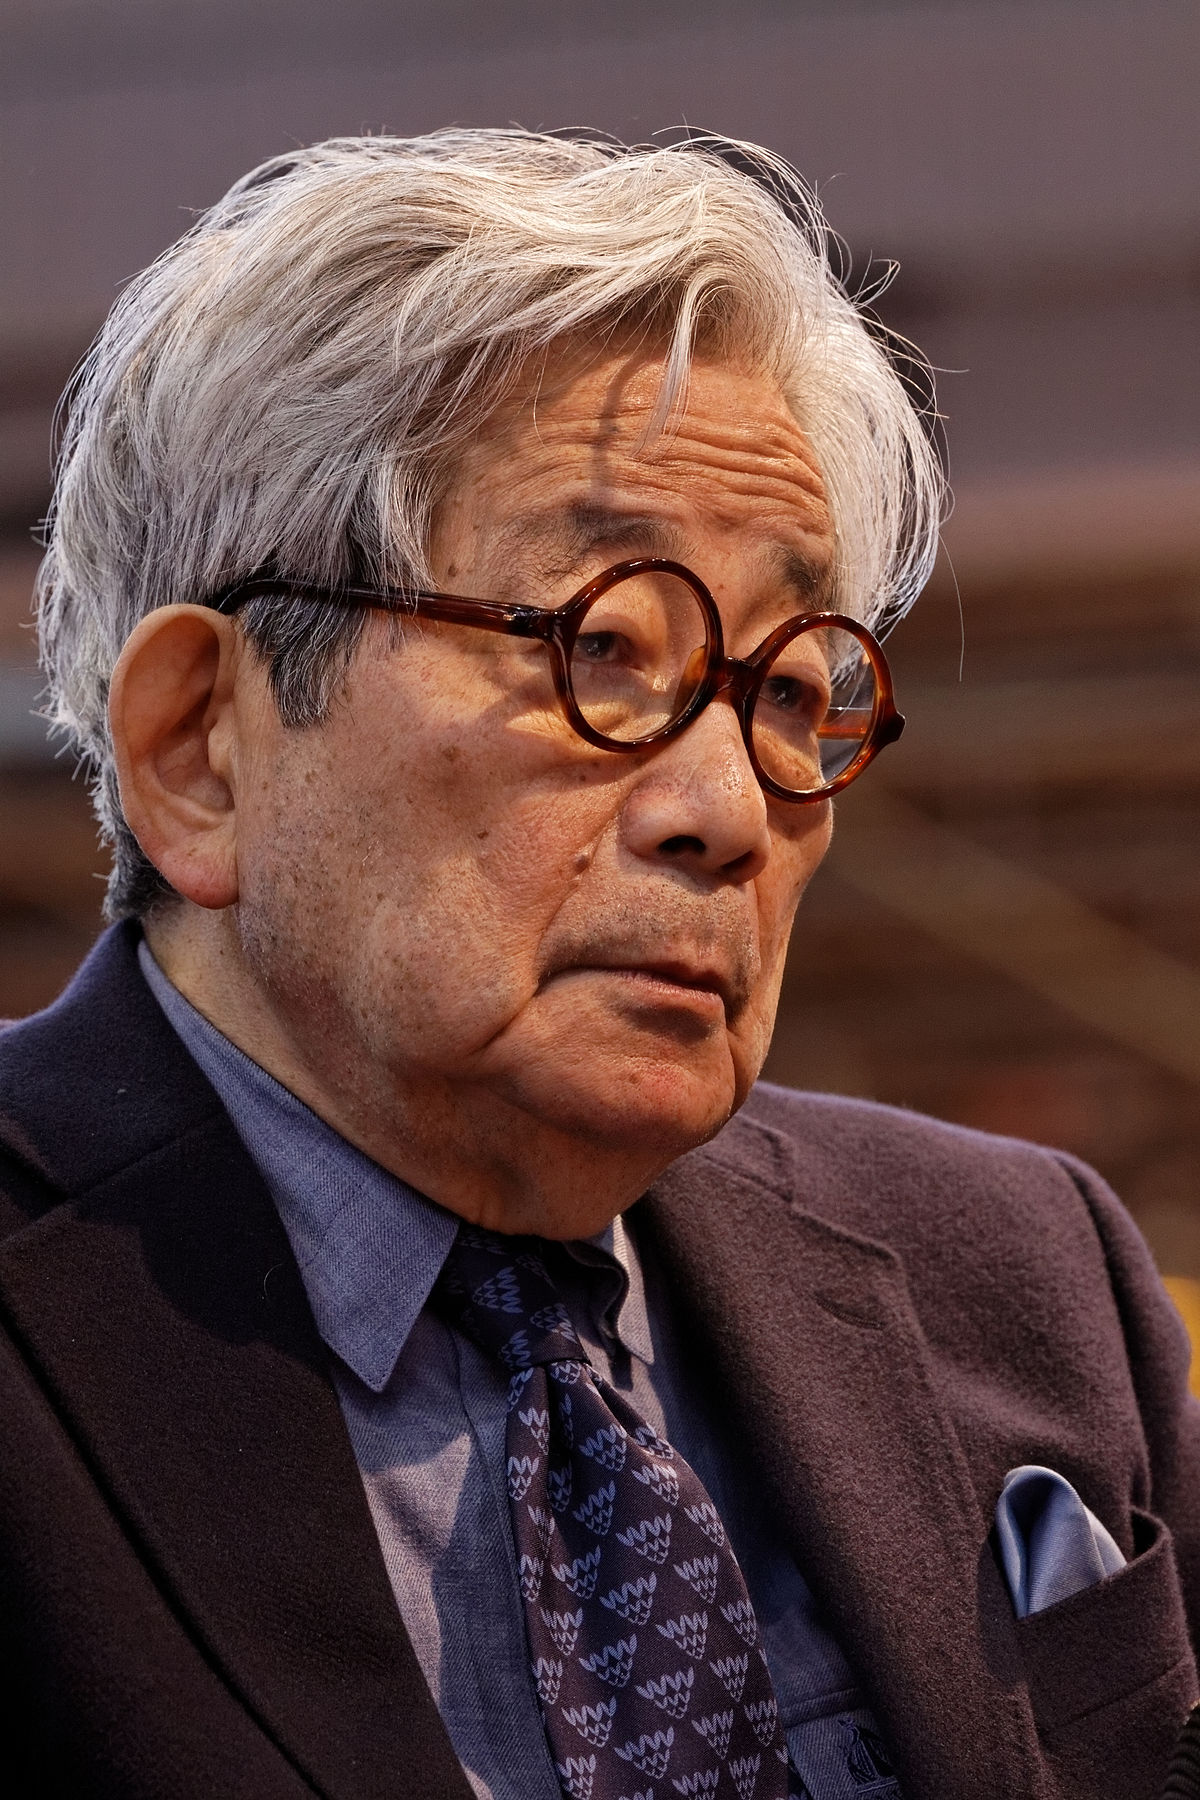 Nobel prize-winner Kenzaburo Oe, dead at 88, used words to preach pacifism 